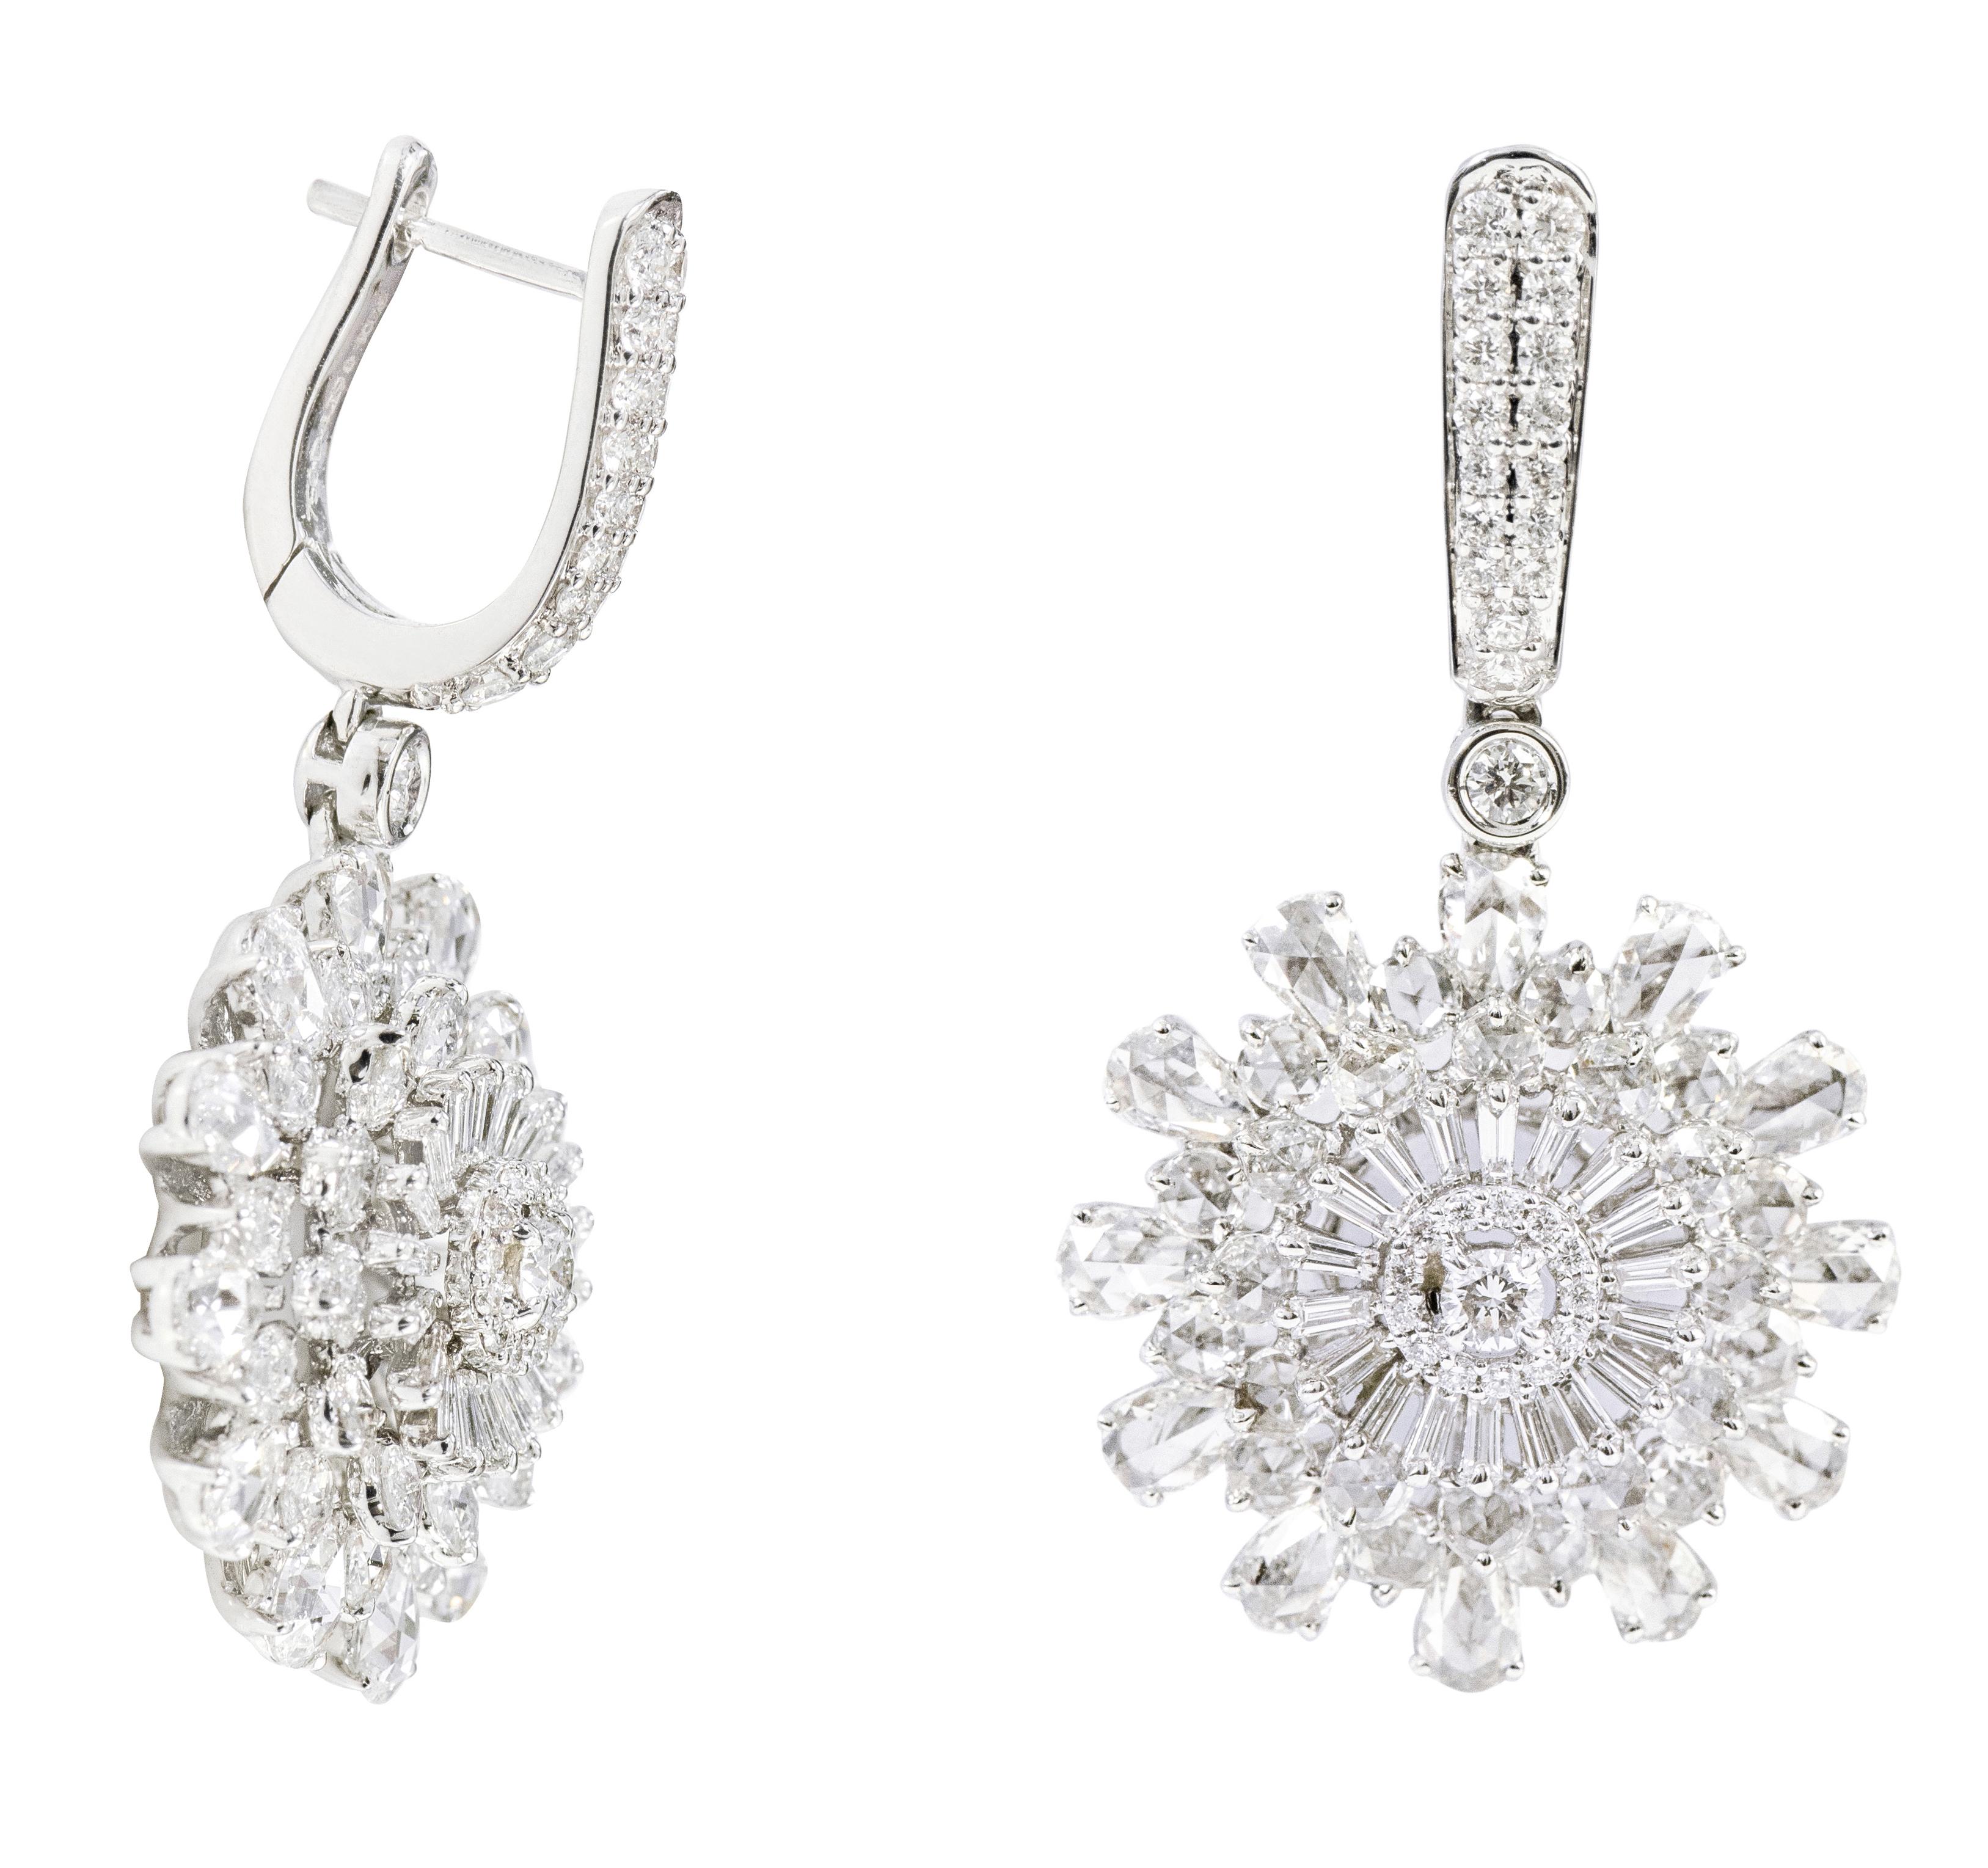 18 Karat White Gold 2.51 Carat Diamond Dangle Earrings Statement

This incredible mixed rose cut solitaire diamond and baguette diamond blazing sun earring is vividly magical. The design is magnificently created in 6 different levels to fire up the